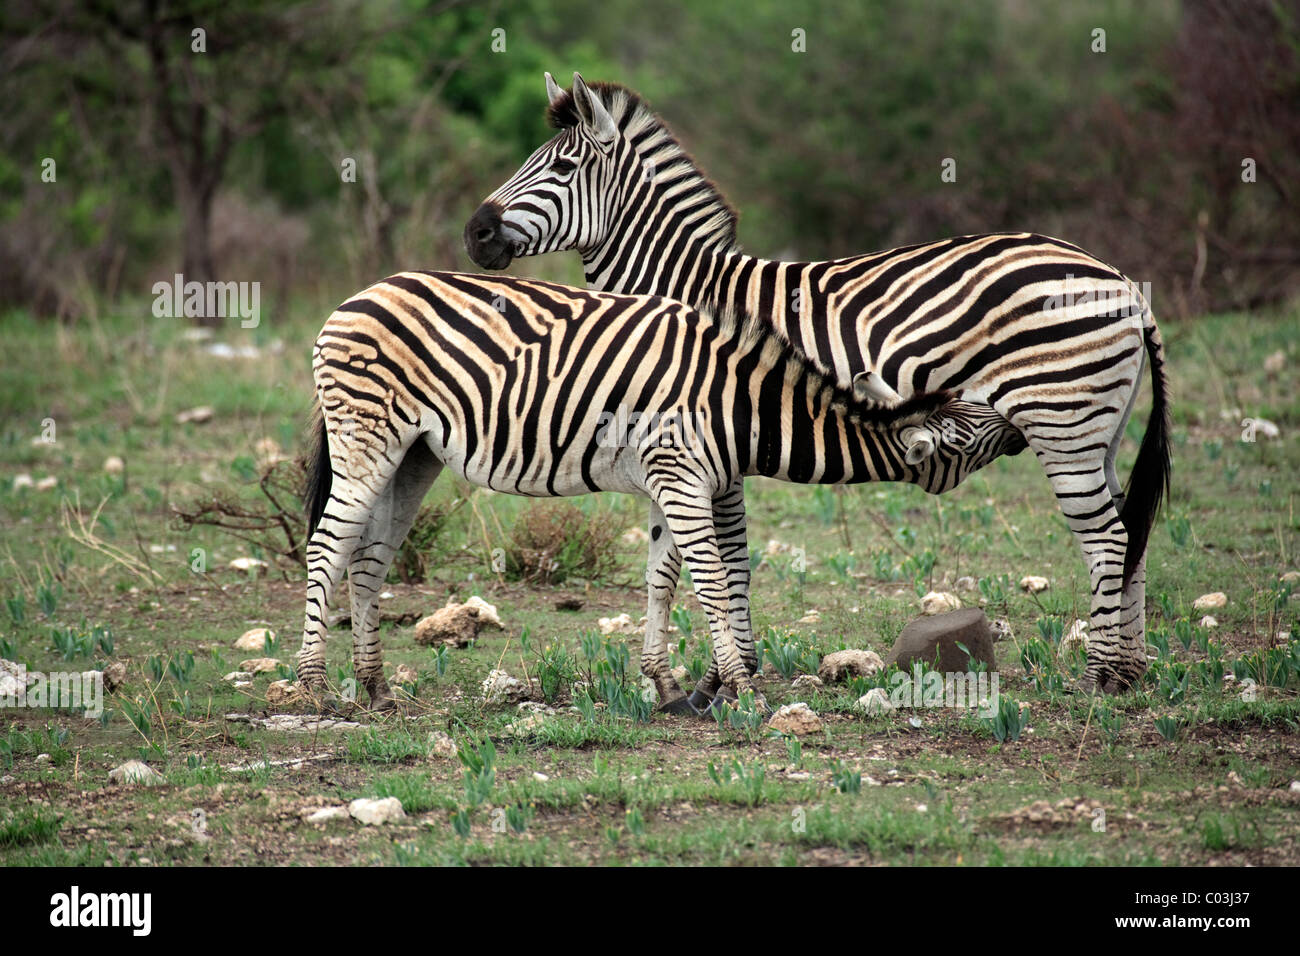 Plains Zebra, Burchell's Zebra (Equus quagga), female adult with suckling young, Kruger National Park, South Africa, Africa Stock Photo